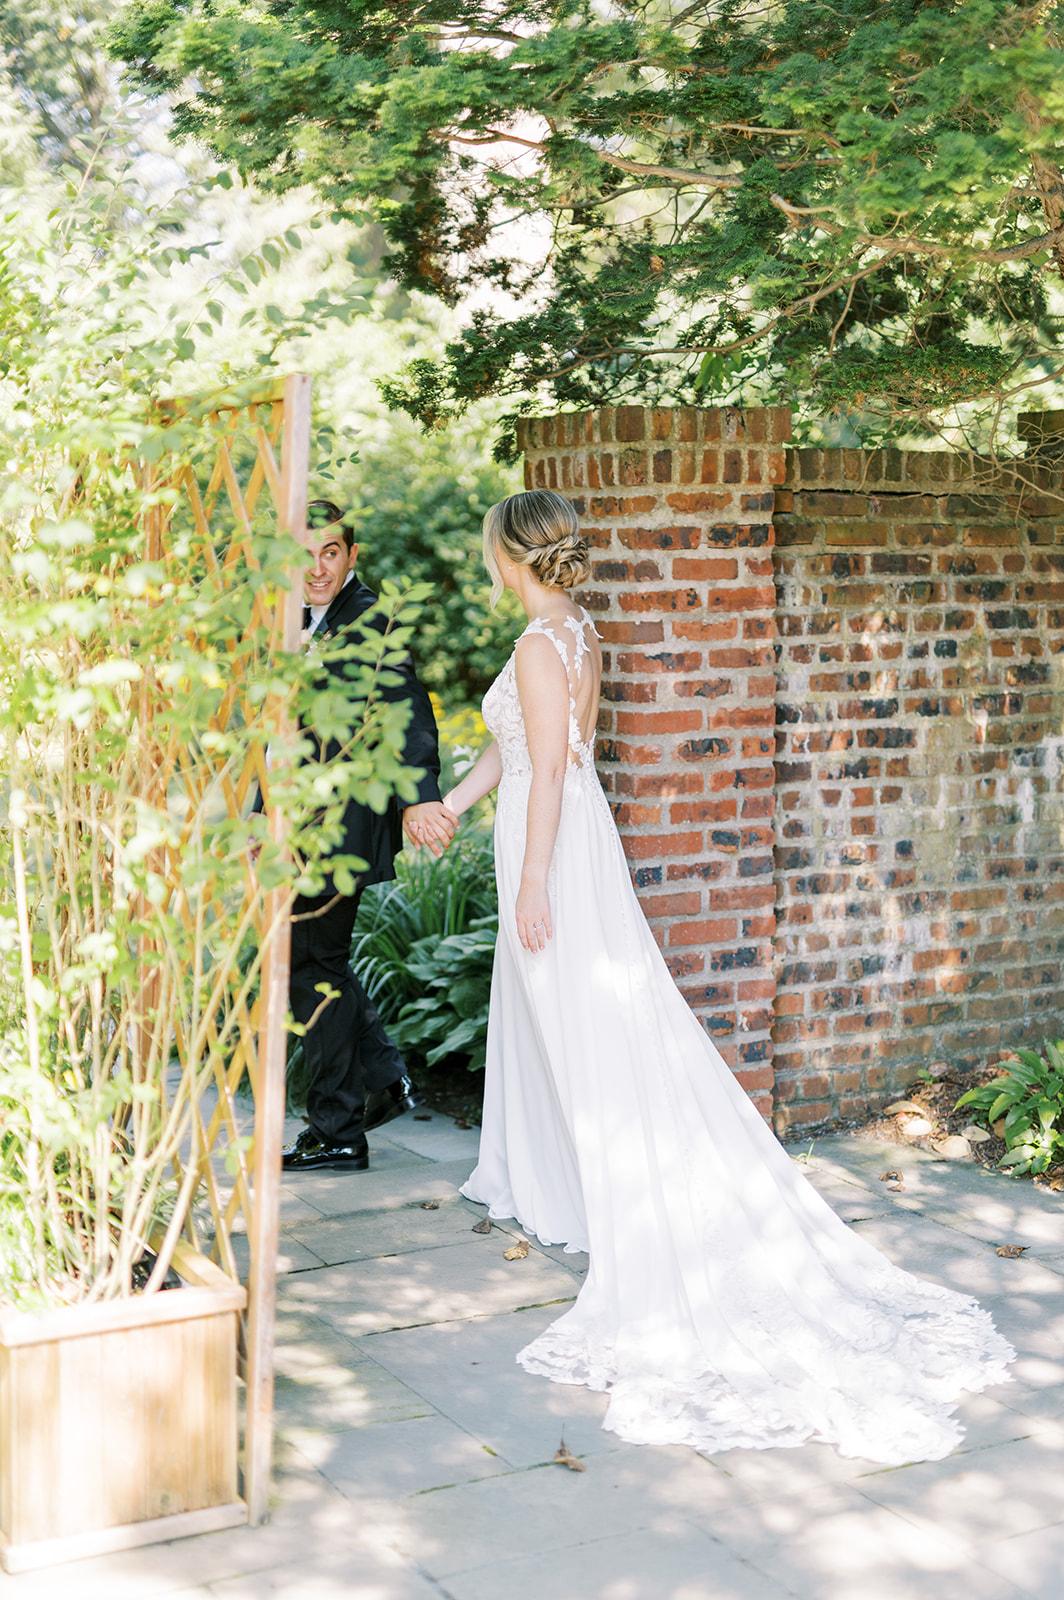 dreaming moment of bride and groom in sunny garden at greenville country club wedding